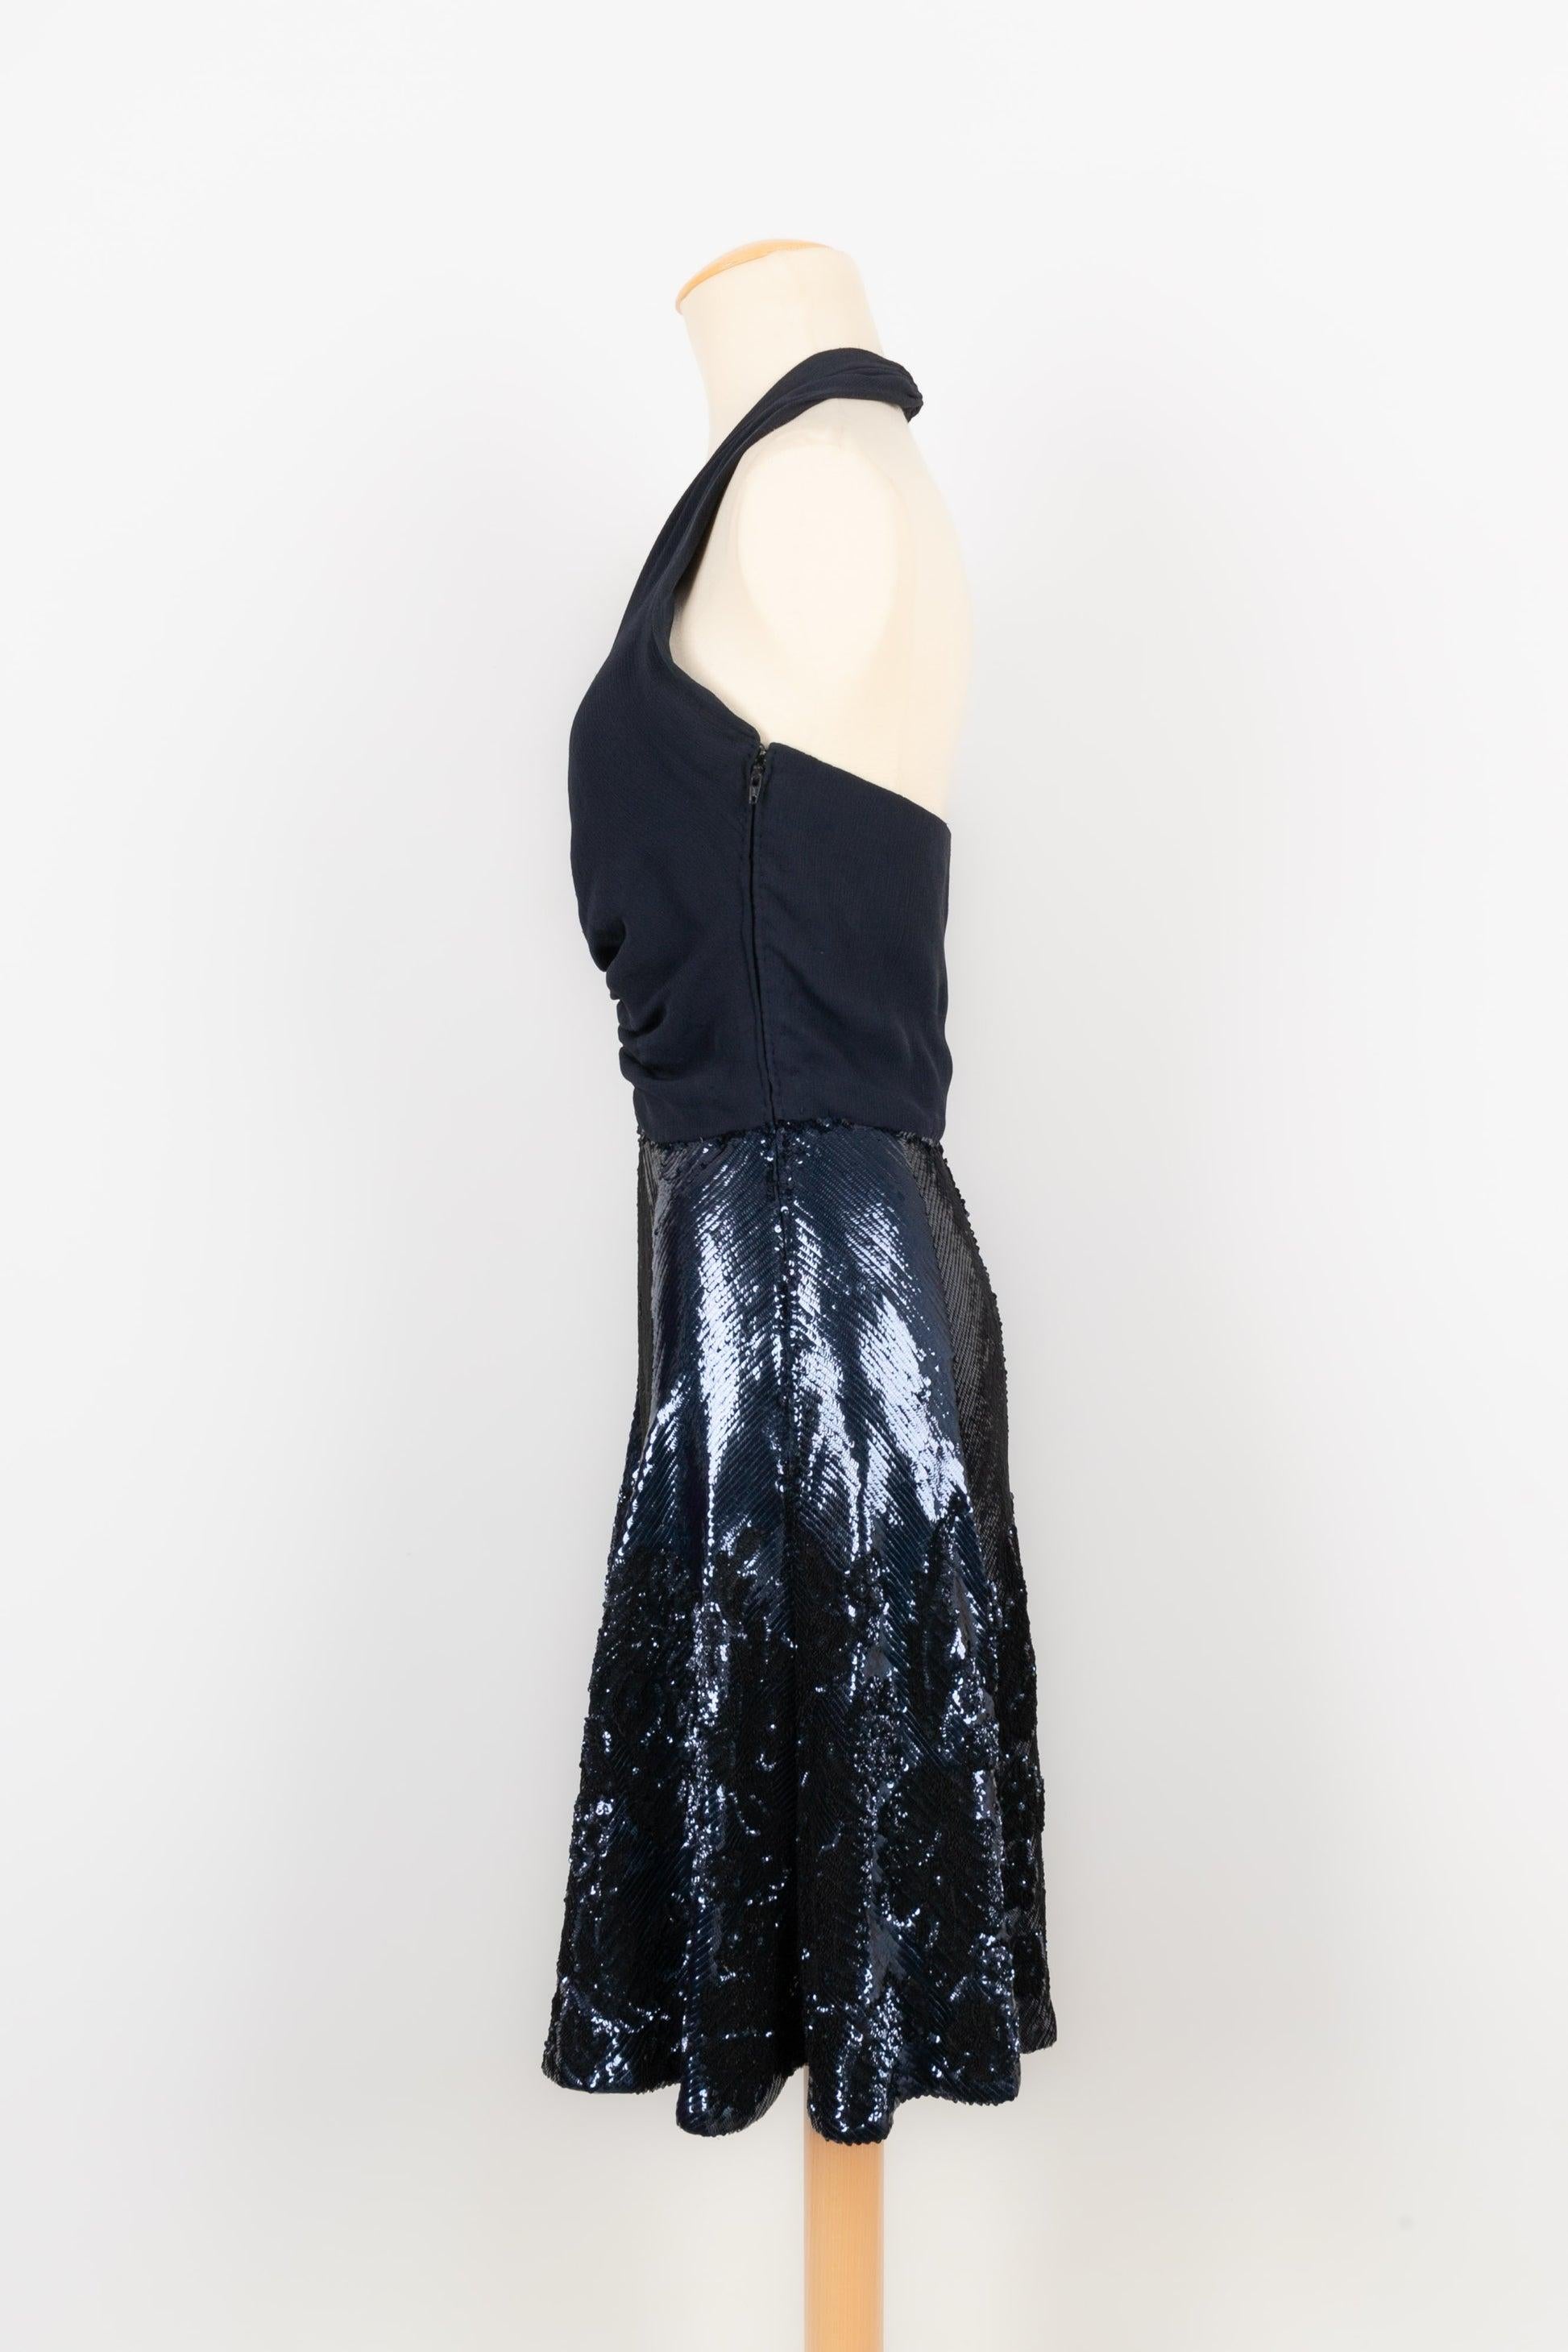 Valentino - Haute Couture skater dress in silk muslin sewn with dark blue sequins. No size nor composition label, it fits a 36FR.

Additional information:
Condition: Very good condition
Dimensions: Chest: 40 cm
Length: about 85 cm

Seller reference: